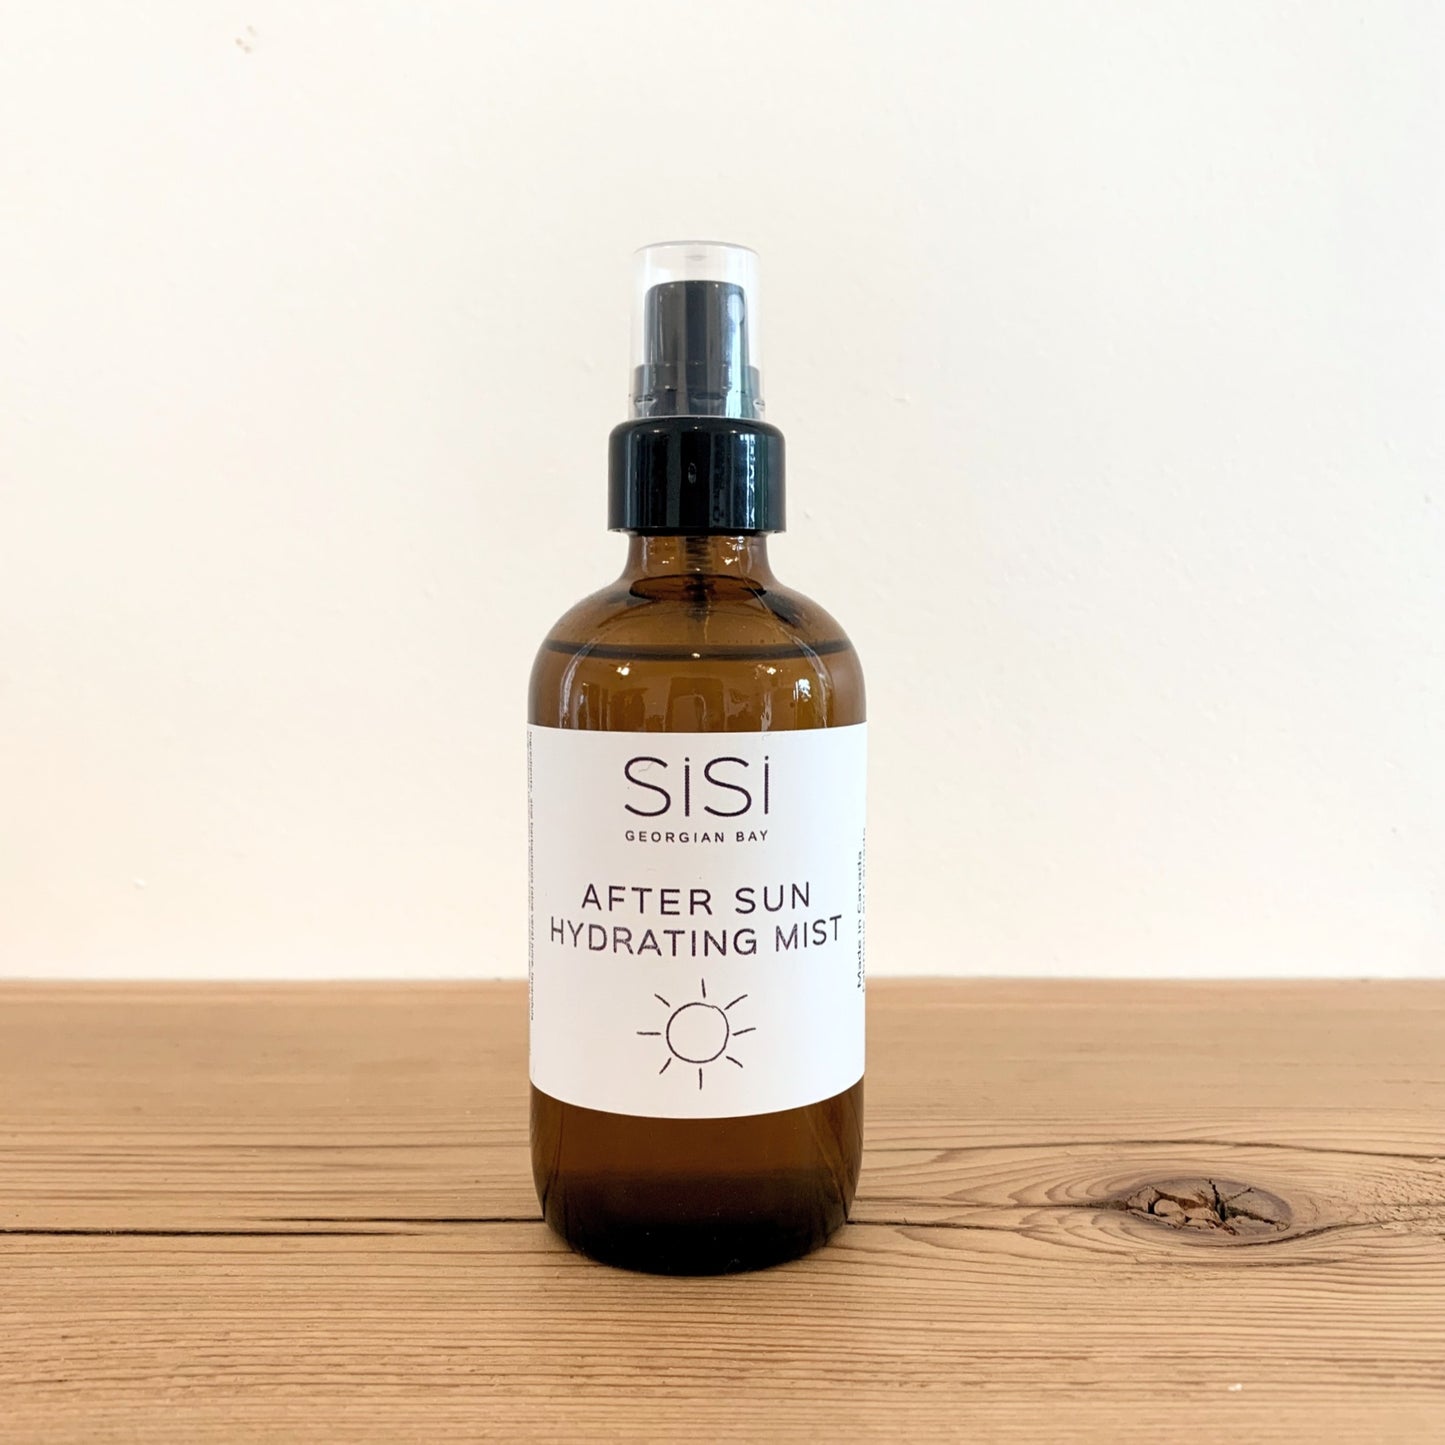 A lovely After Sun Hydrating Mist inspired by nature. Eco-friendly glass packaging with a mister top for easy application